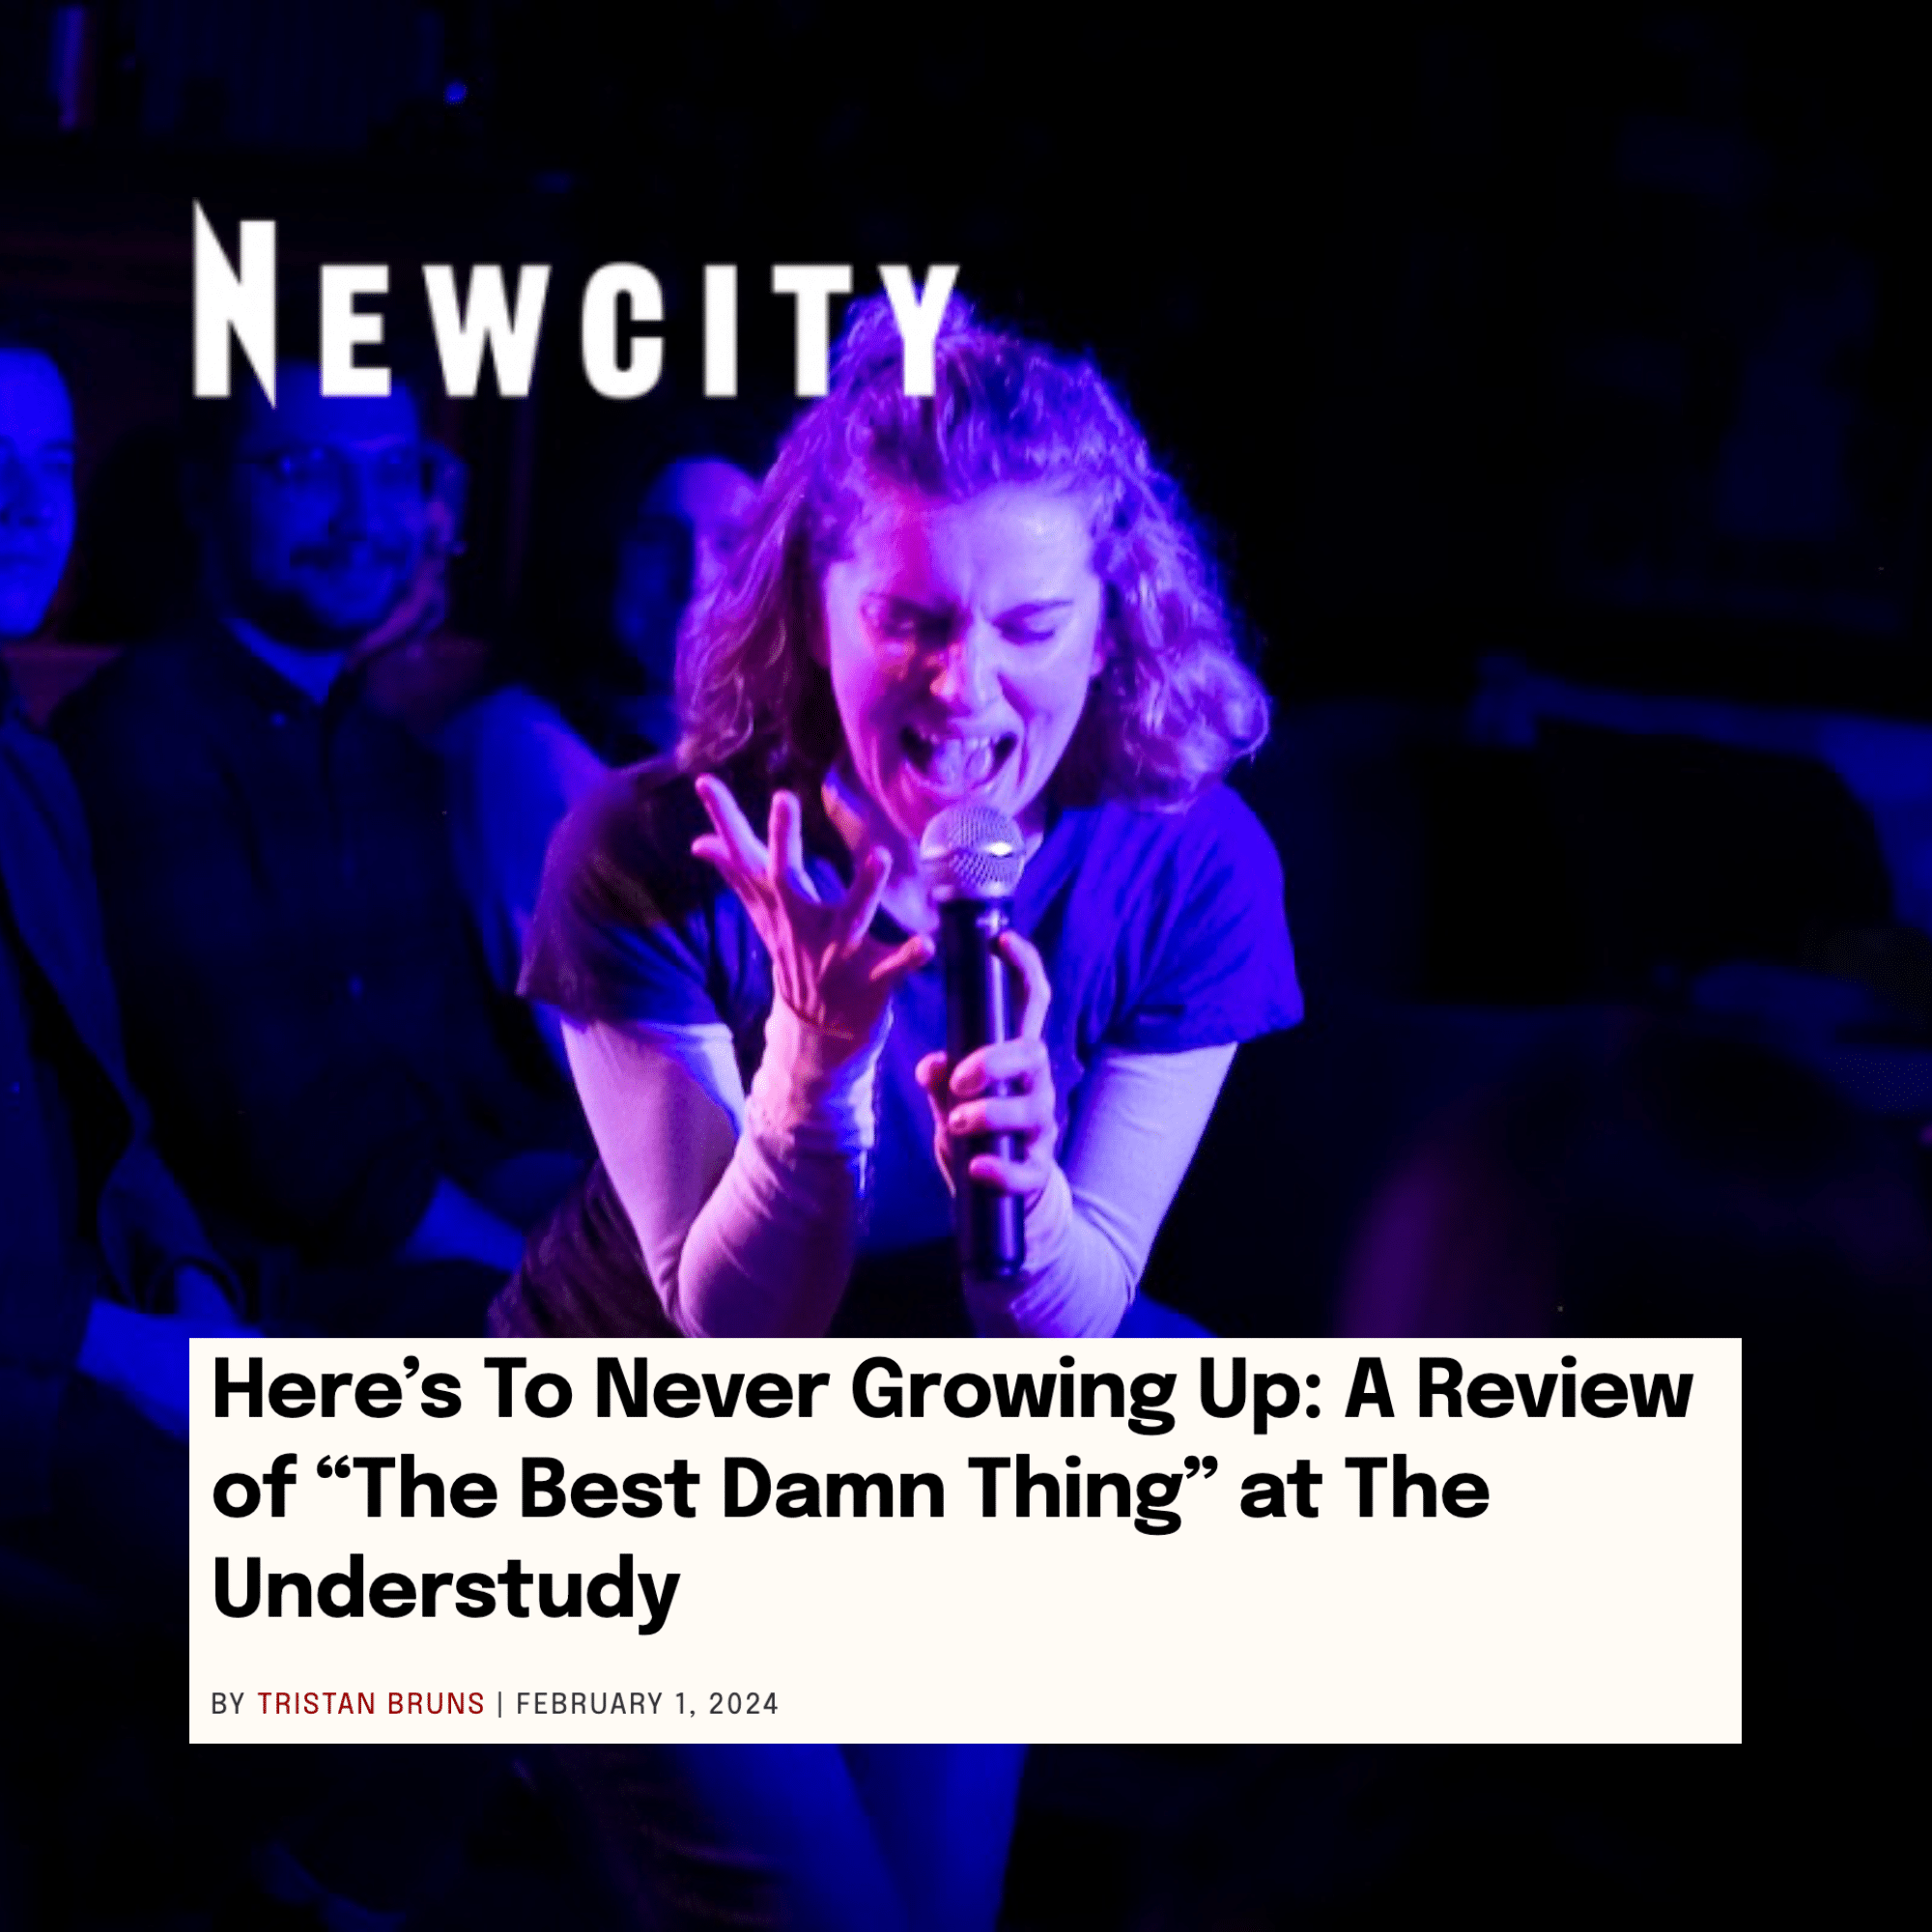 Here’s To Never Growing Up: A Review of “The Best Damn Thing” at The Understudy